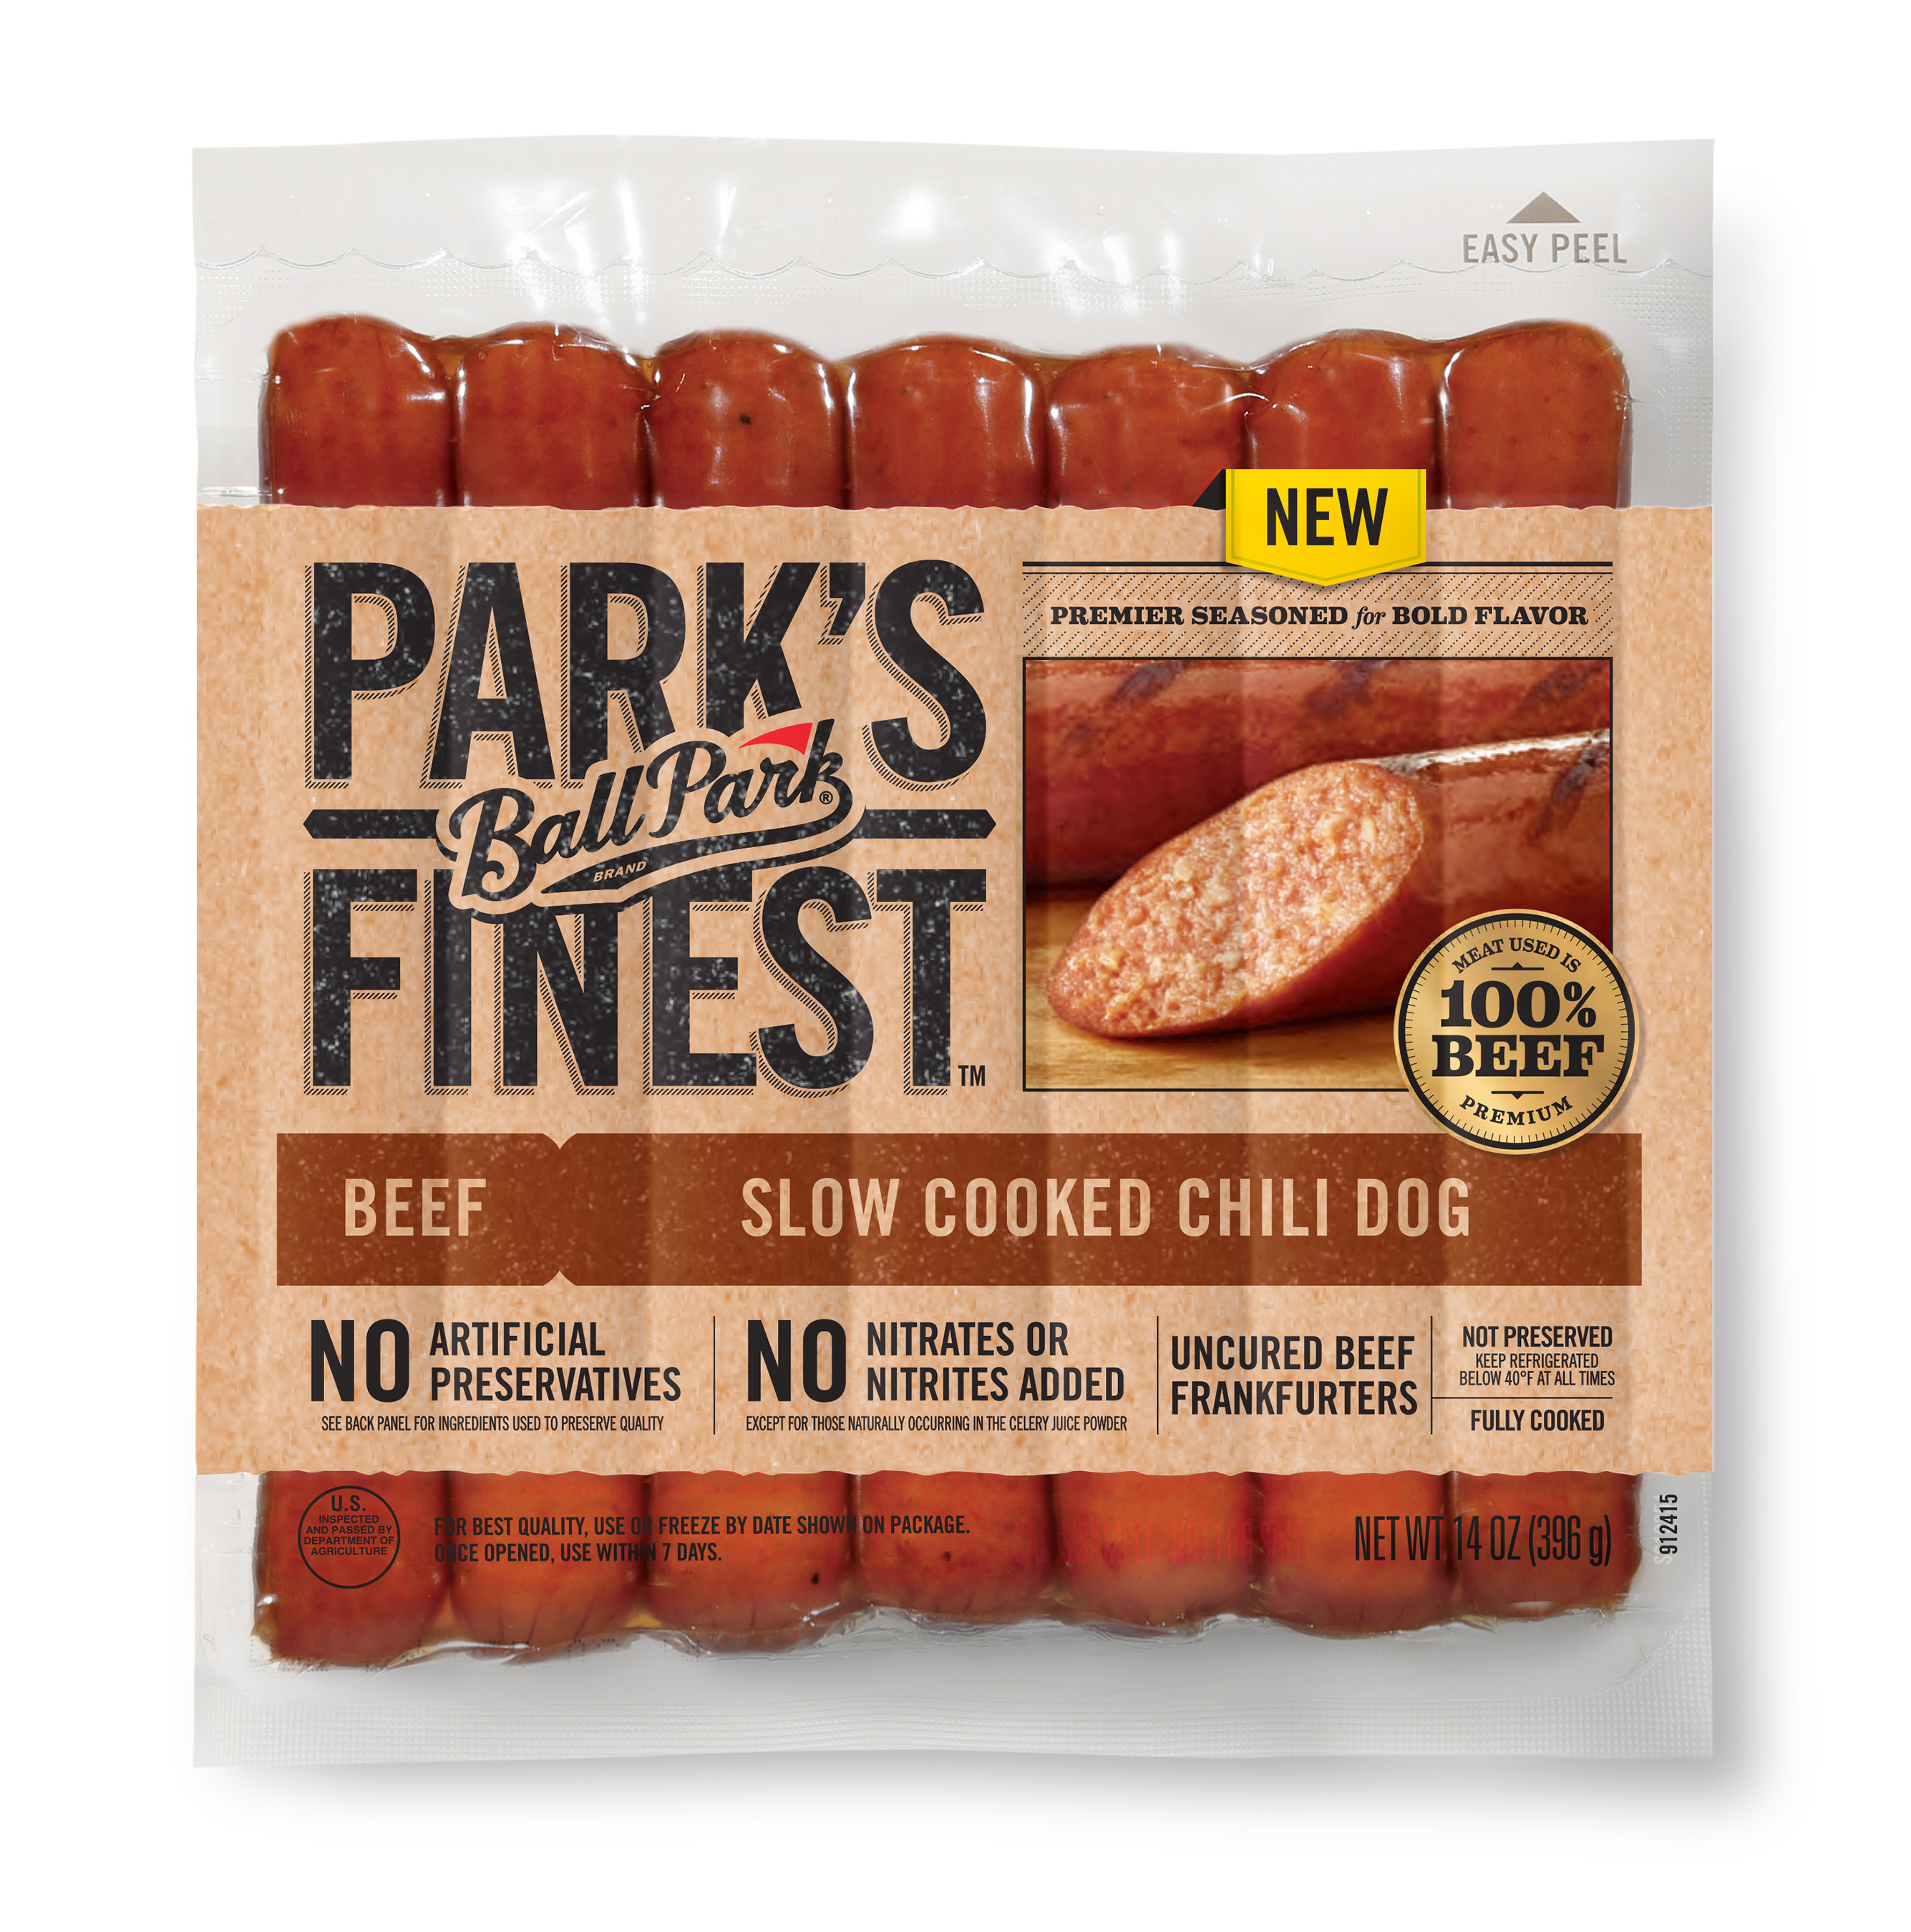 The NEW Ball Park Park's Finest(TM) Slow Cooked Chili Frankfurters are packed with big, bold flavors and infused with premium seasoning you can see.